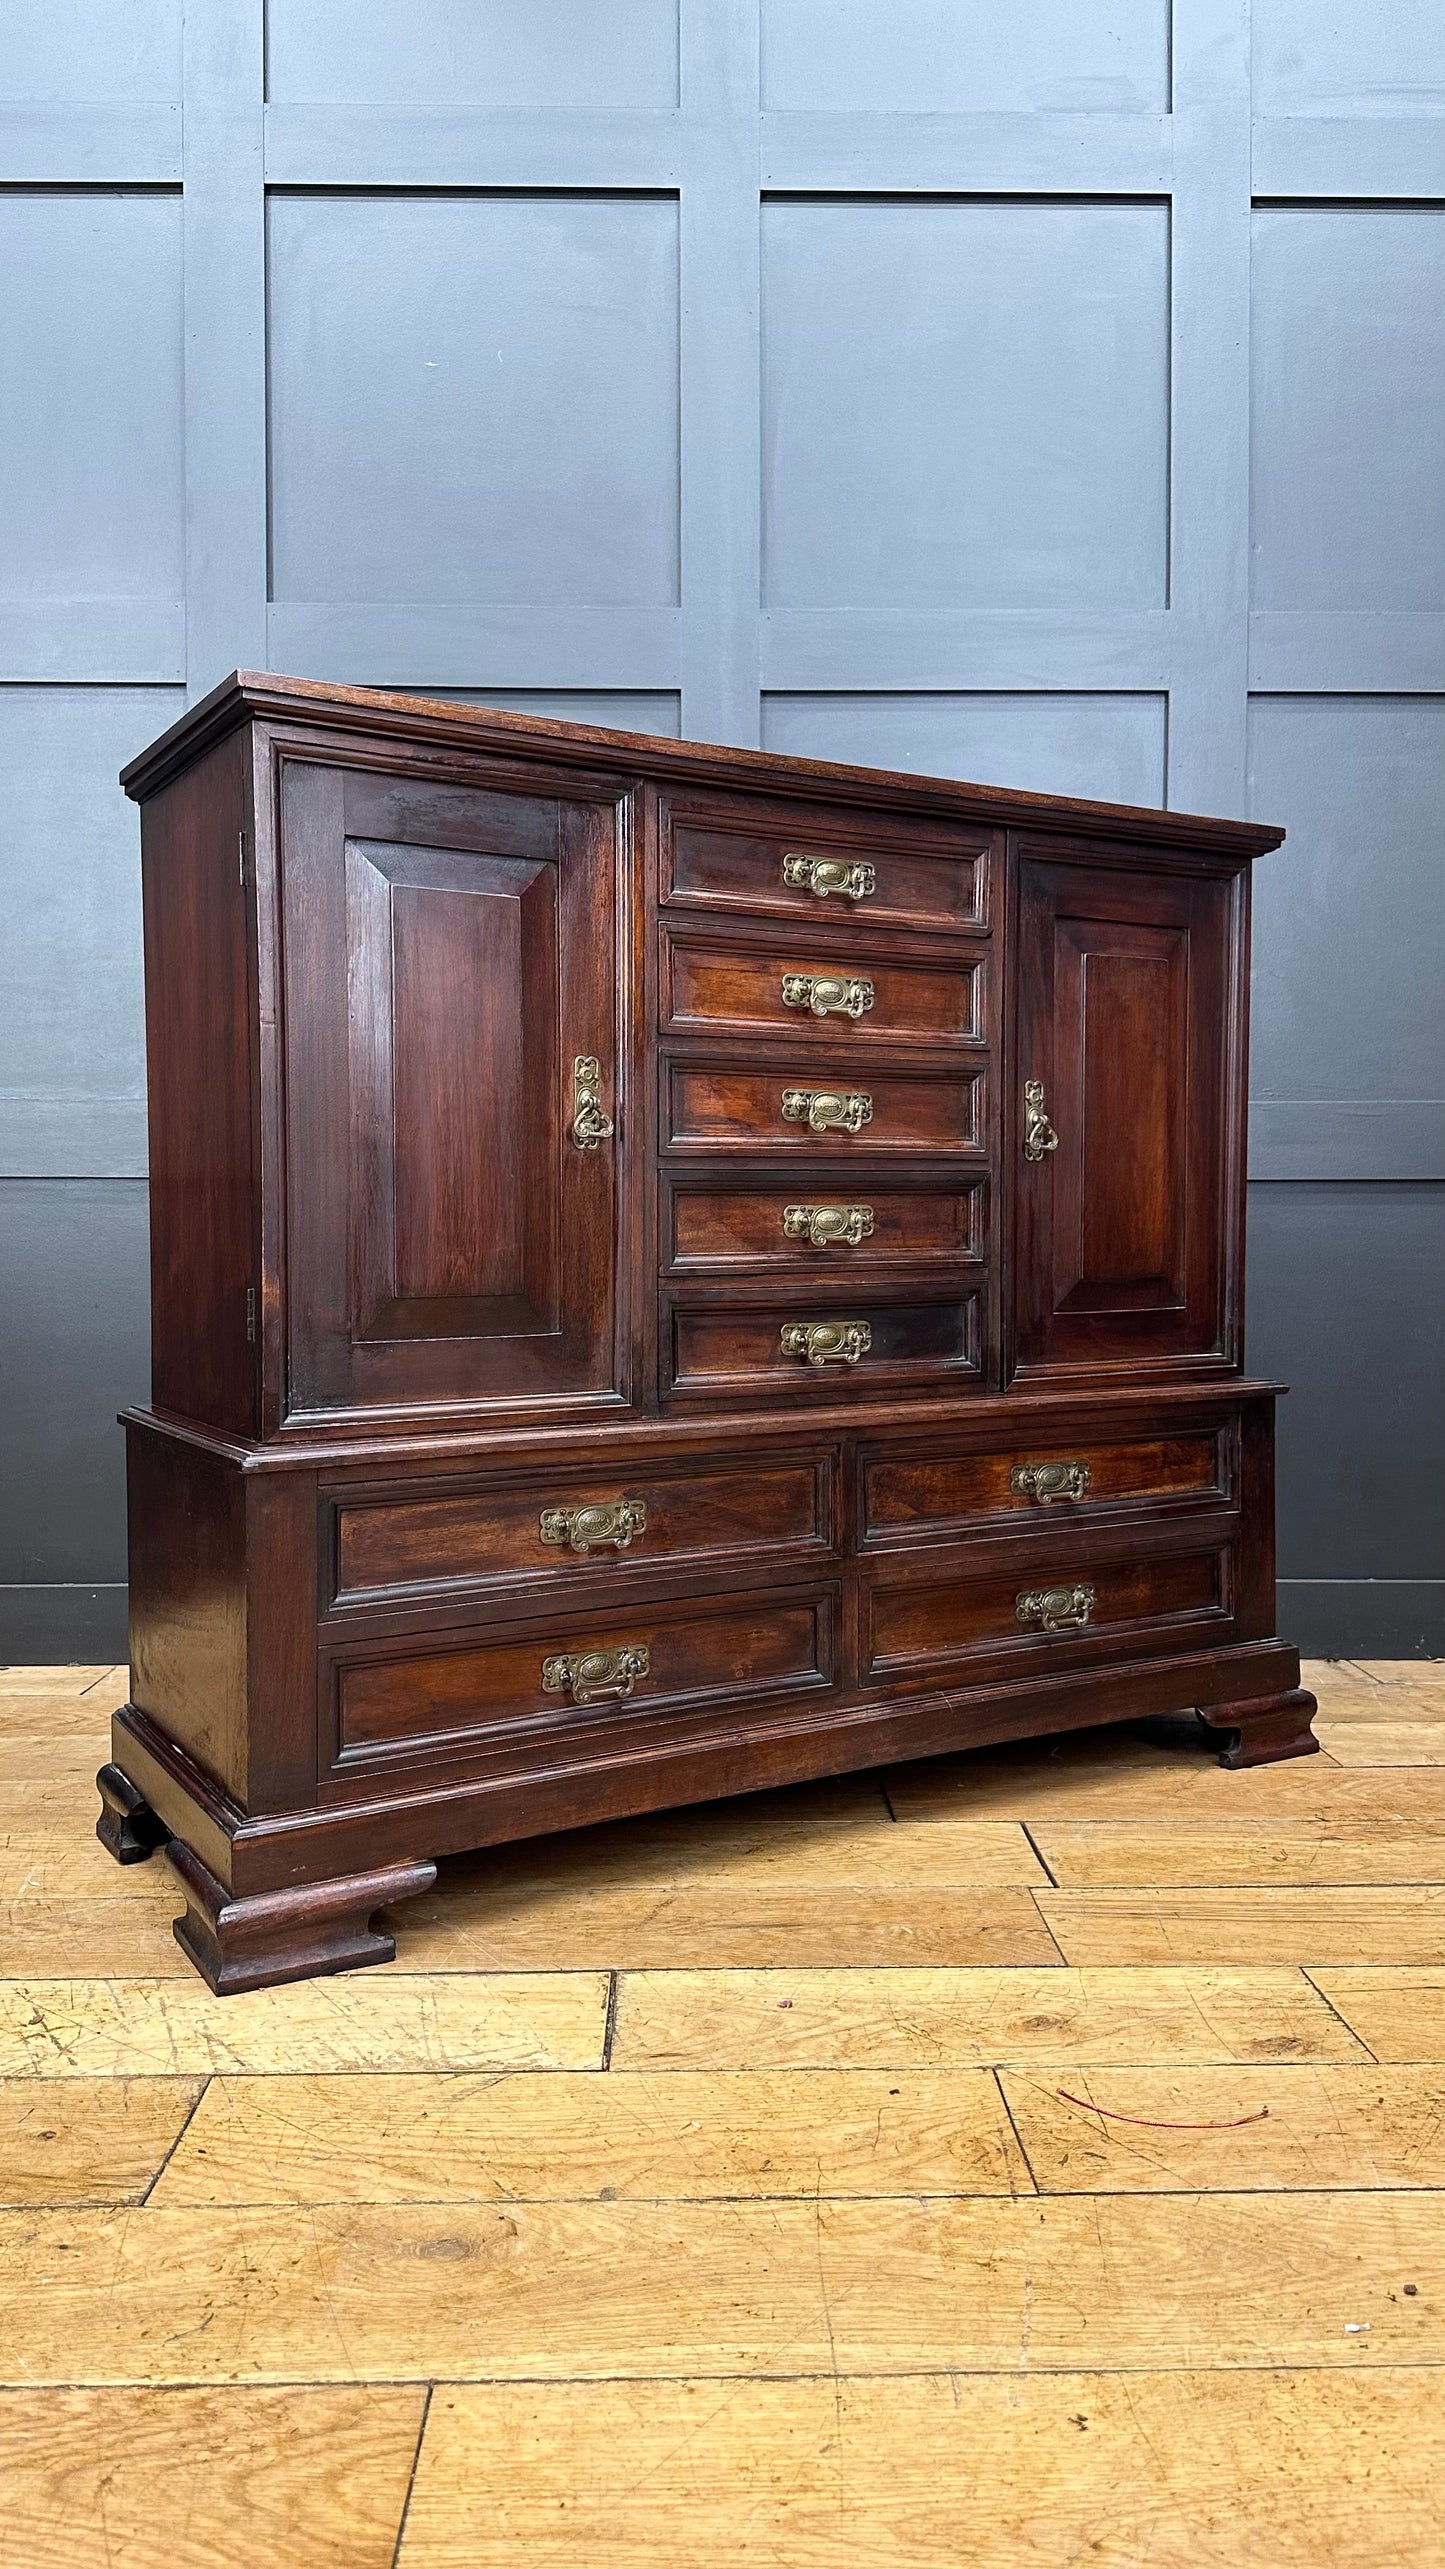 Victorian Sideboard / Antique Mahogany Chest Of Drawers / Antique Chest